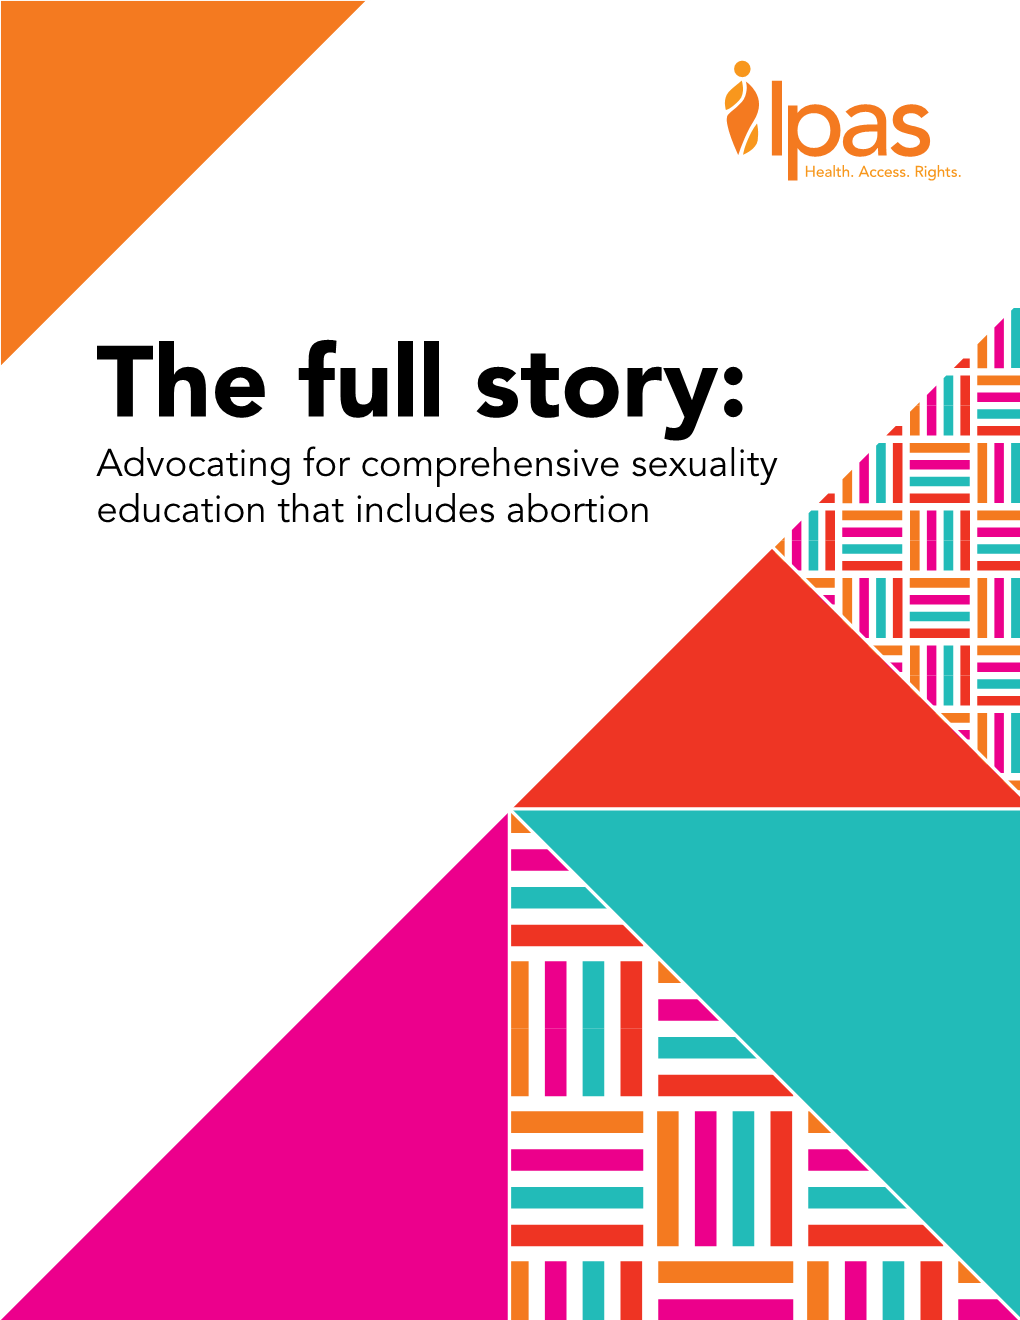 The Full Story: Advocating for Comprehensive Sexuality Education That Includes Abortion ISBN: 978 – 1 – 7337804 – 4 – 5